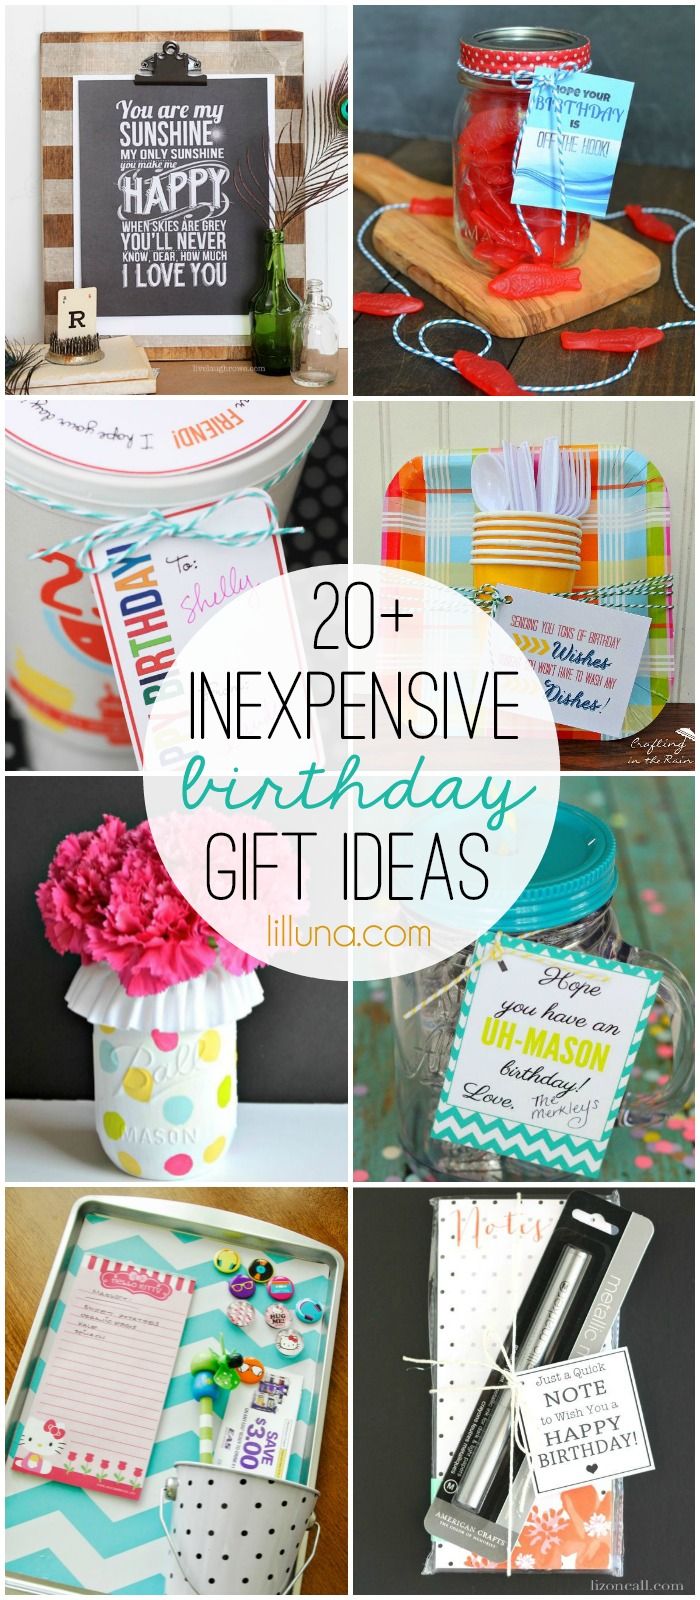 Inexpensive Birthday Gift Ideas -   DIY gifts on a budget Ideas